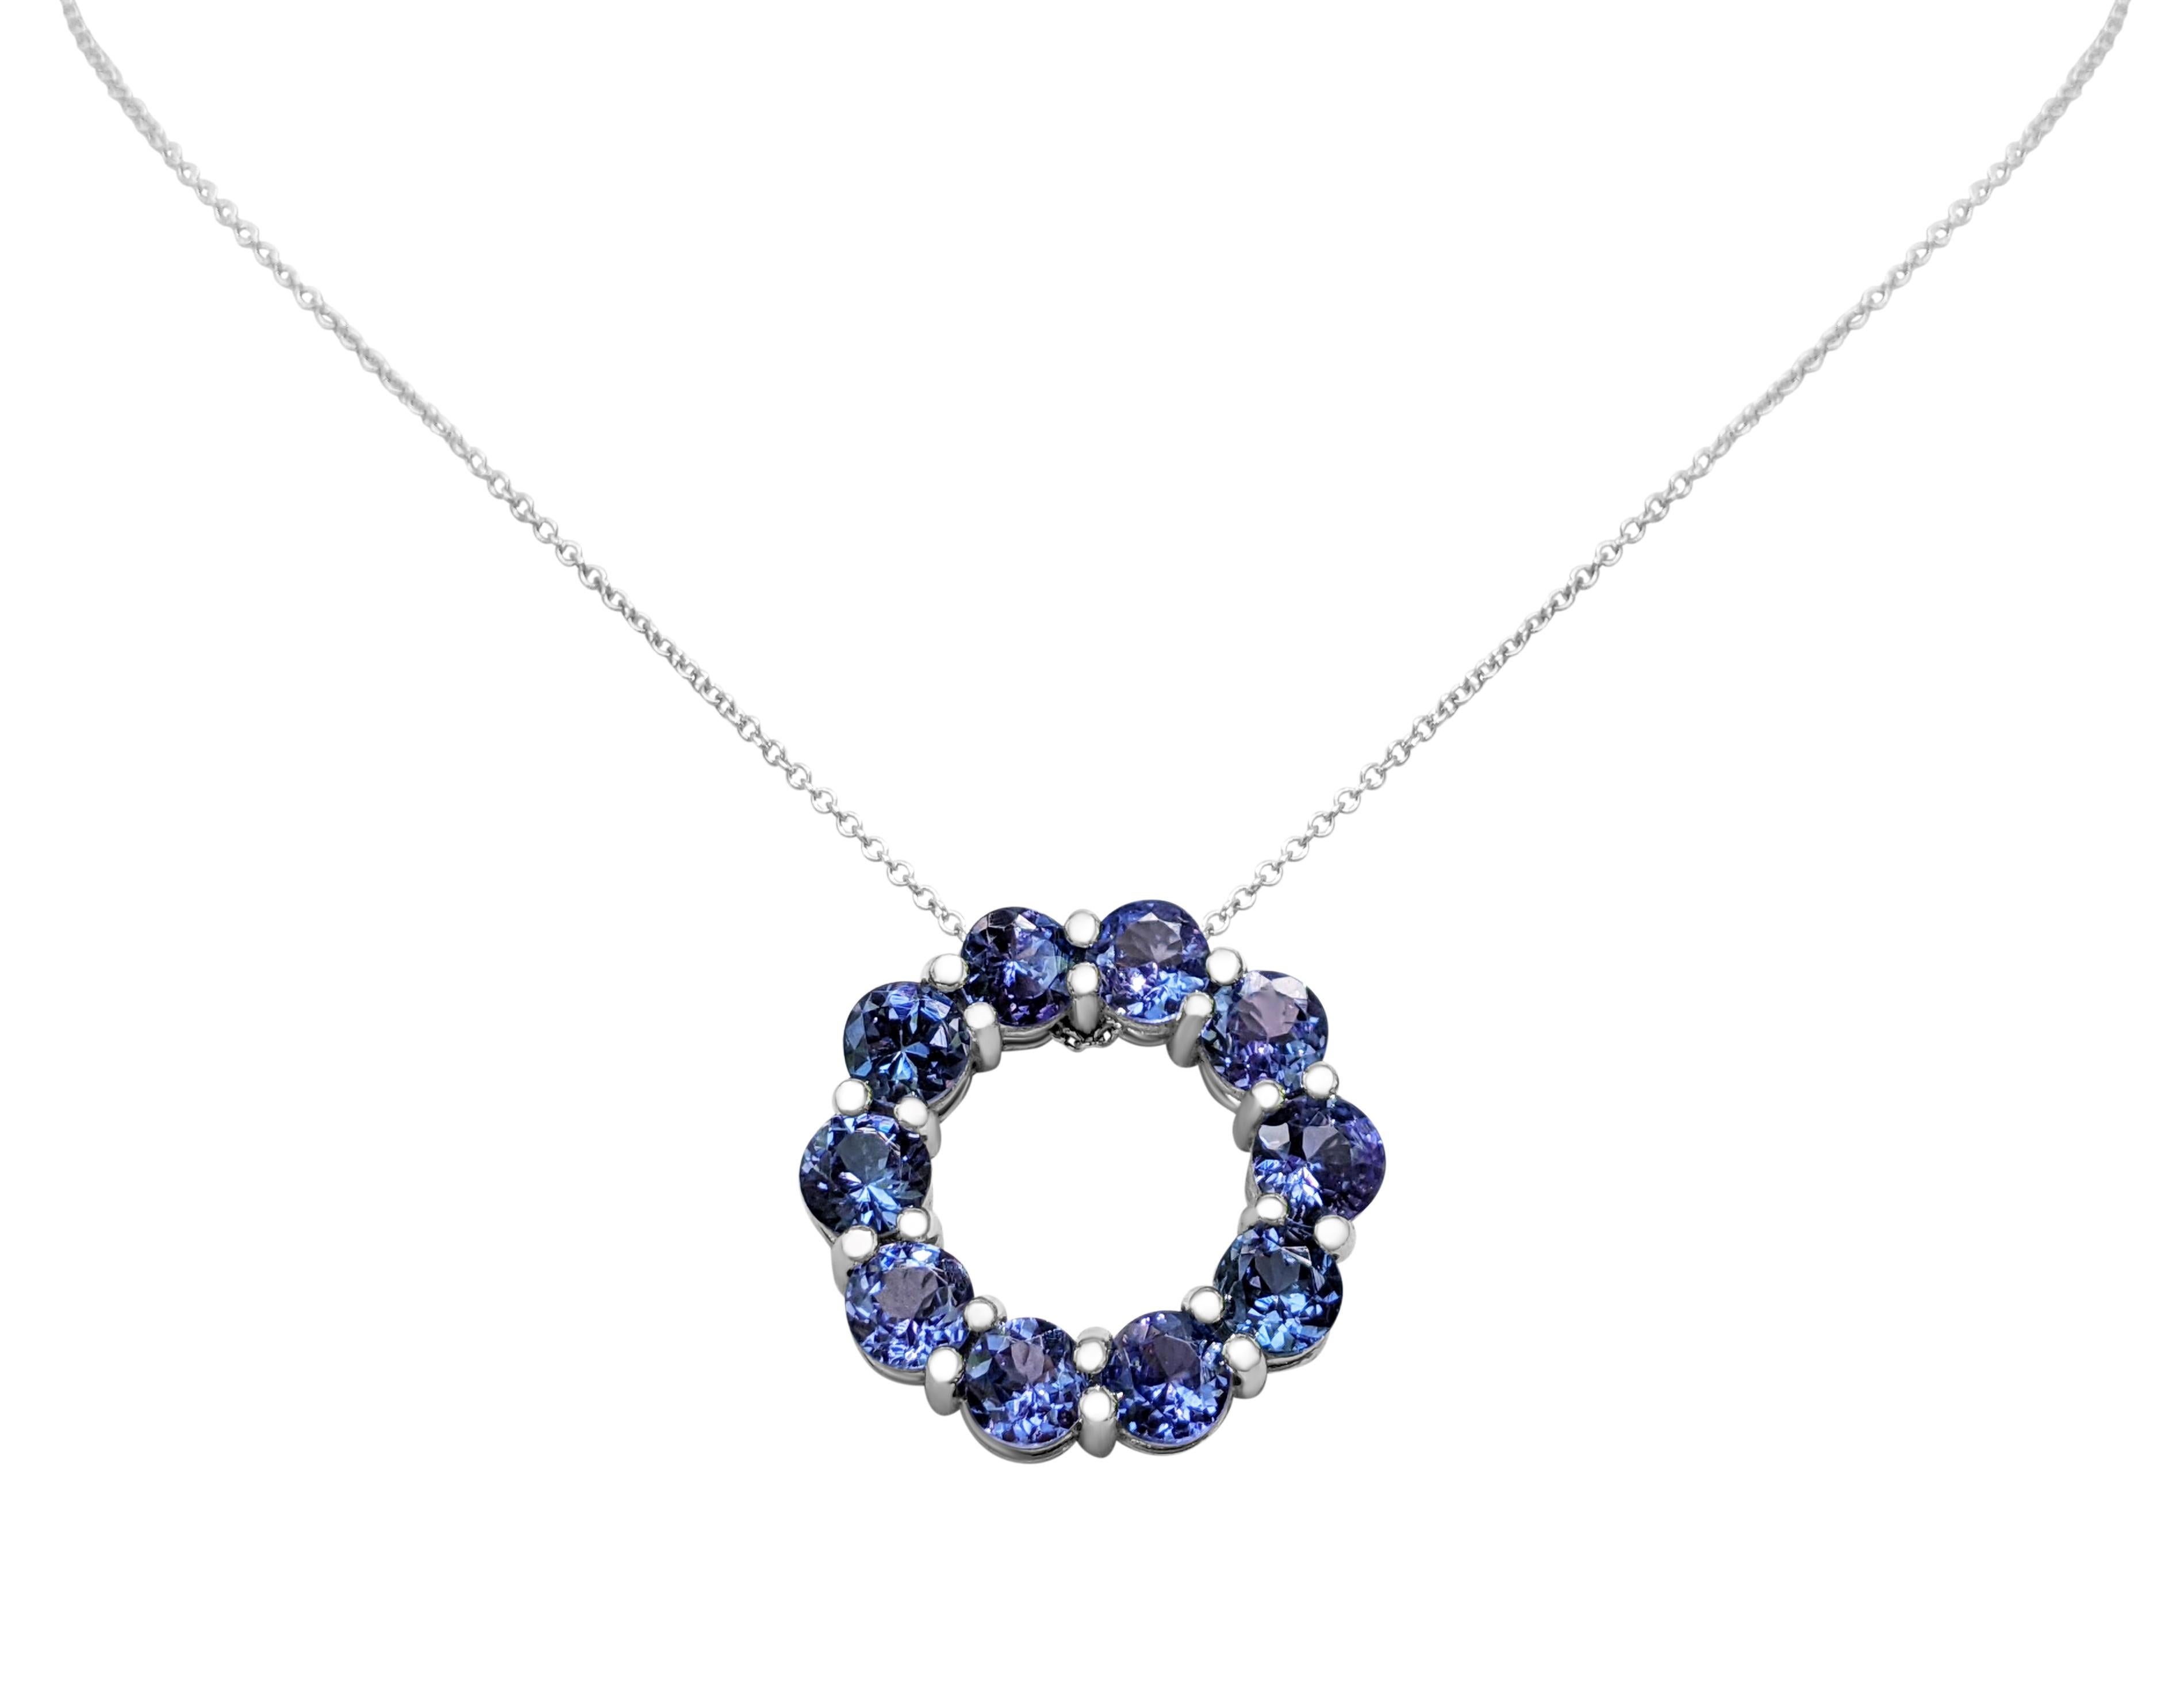 Don't miss your chance to own this unique and exquisite pendant necklace of top quality Tanzanite.

Center Tanzanite Stone:
Weight: 4.52 cttw / 10 pieces
Color: Violetish blue
Shape: Round Mixed

Item ships from Israeli Diamonds Exchange, customers